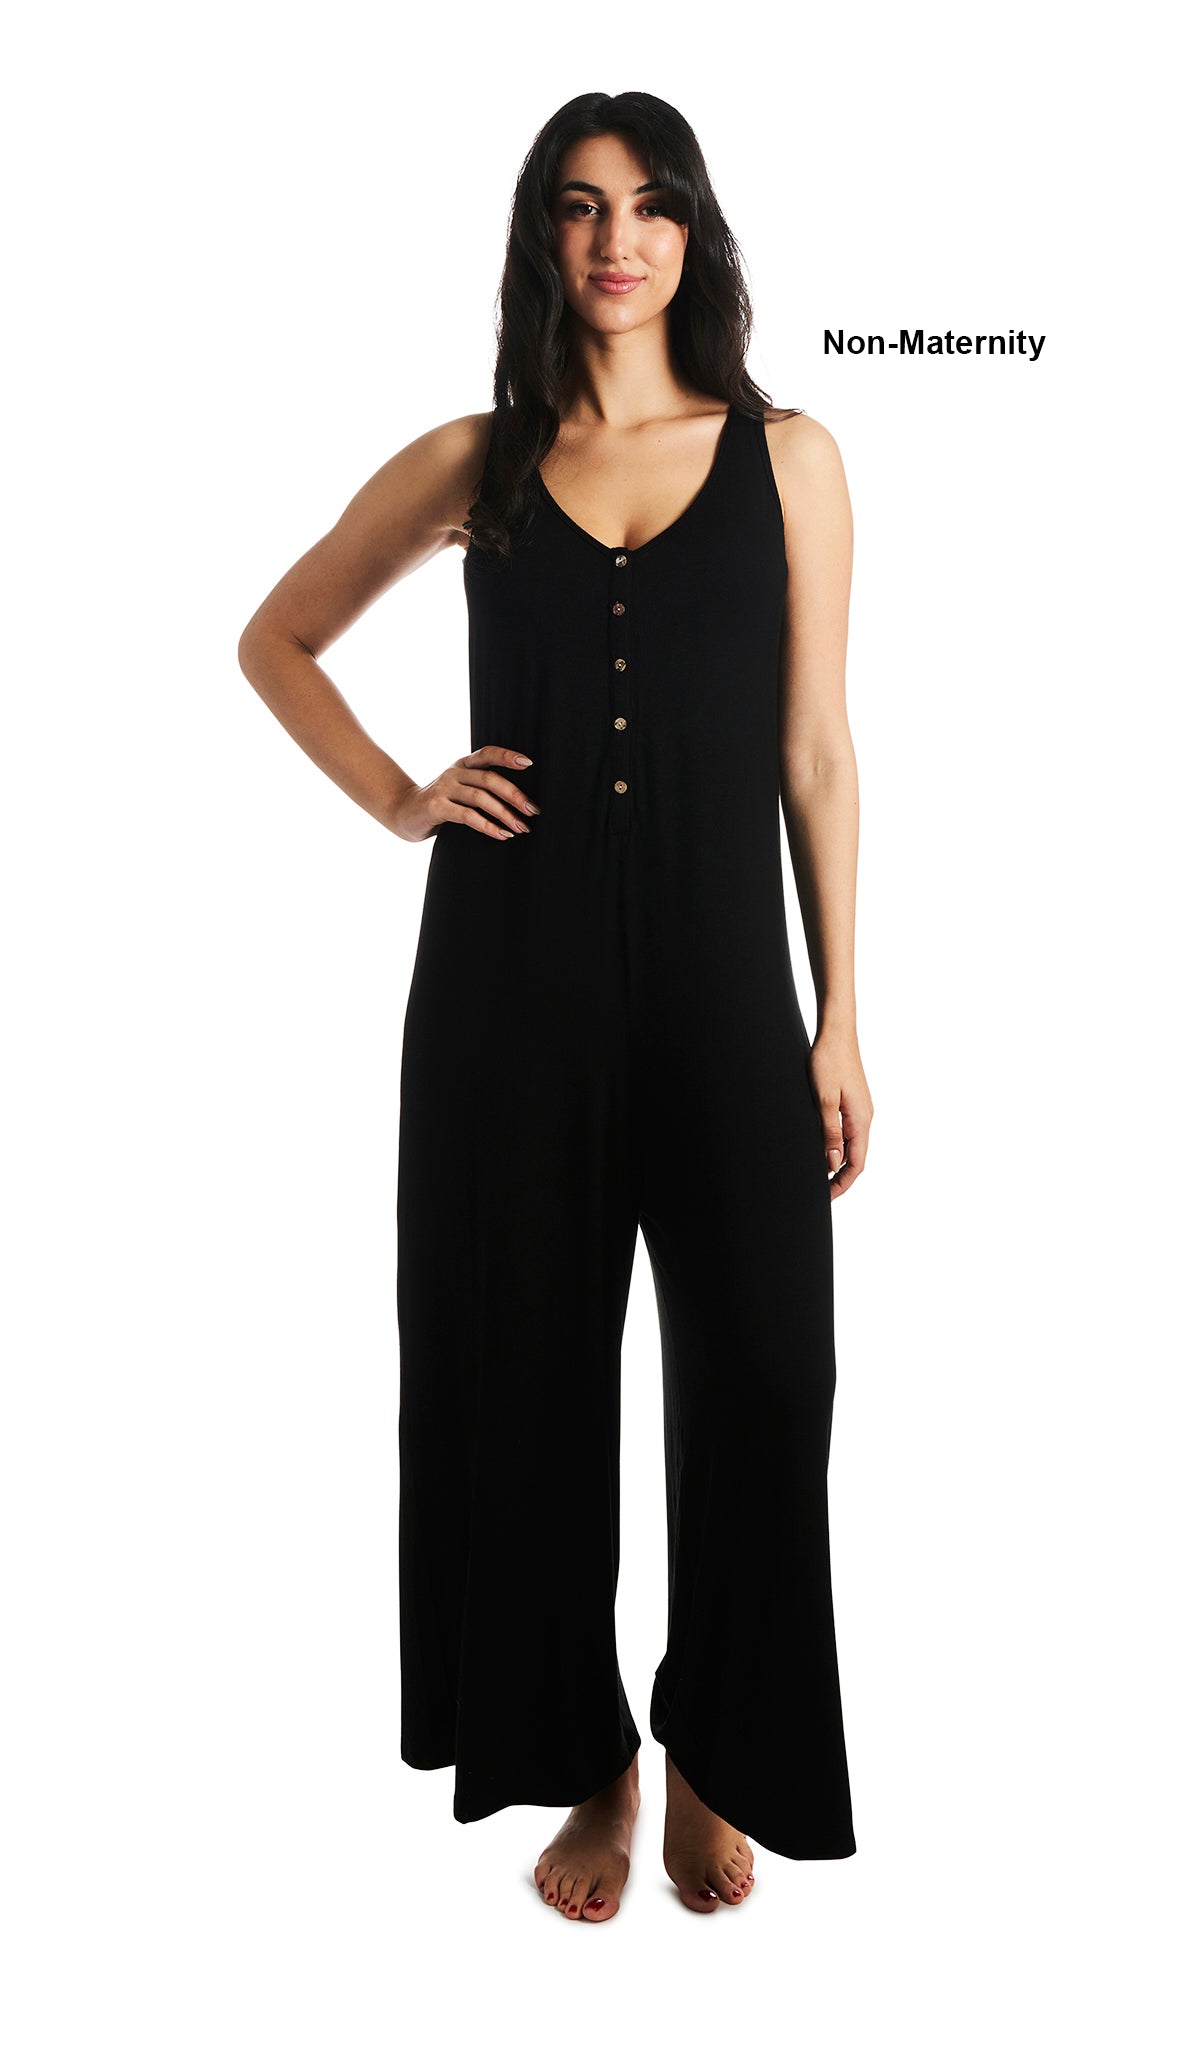 Black Luana romper. Woman wearing sleeveless wide-leg romper with scoop-neckline with button-front placket as non-maternity with one hand resting on hip.